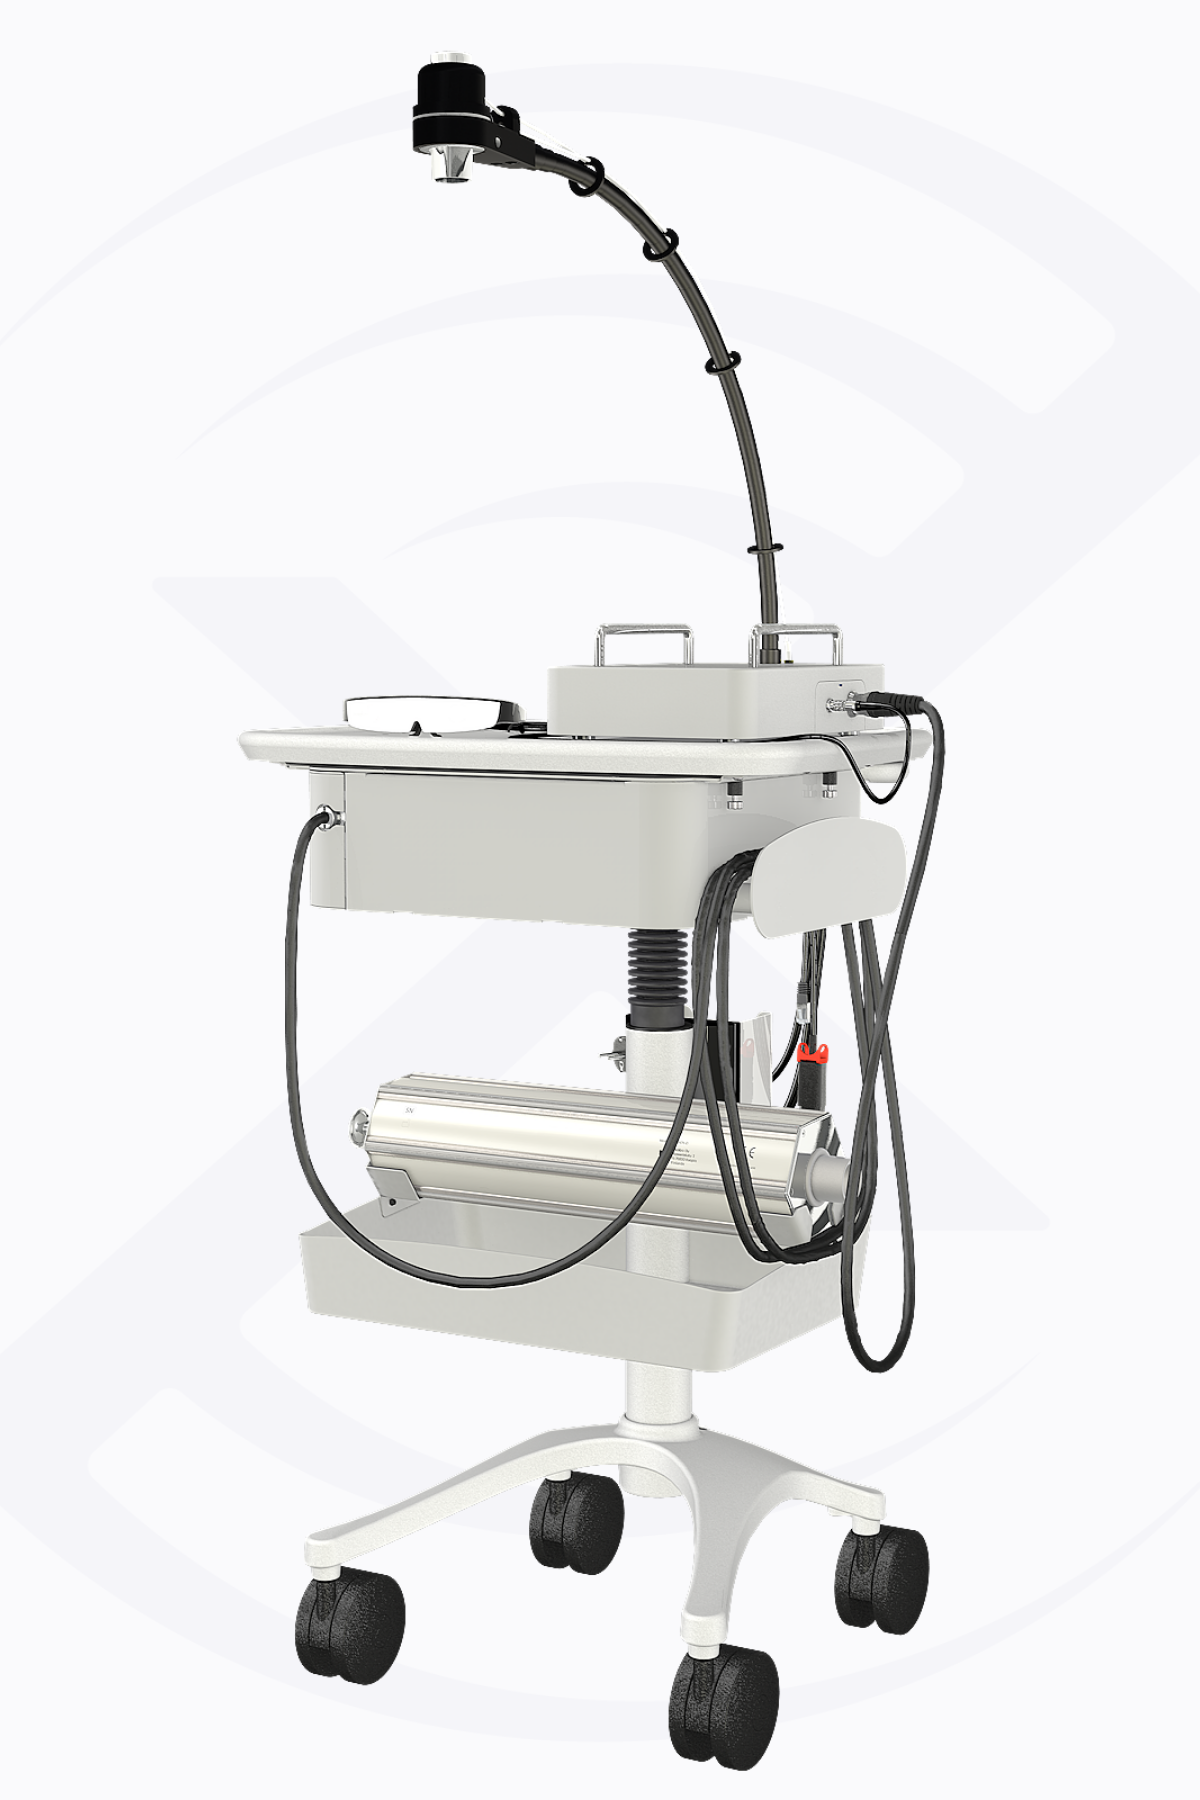 Professional portable medical workstation cart for radiation therapy with devices attached, featuring a rolling base and adjustable arm.